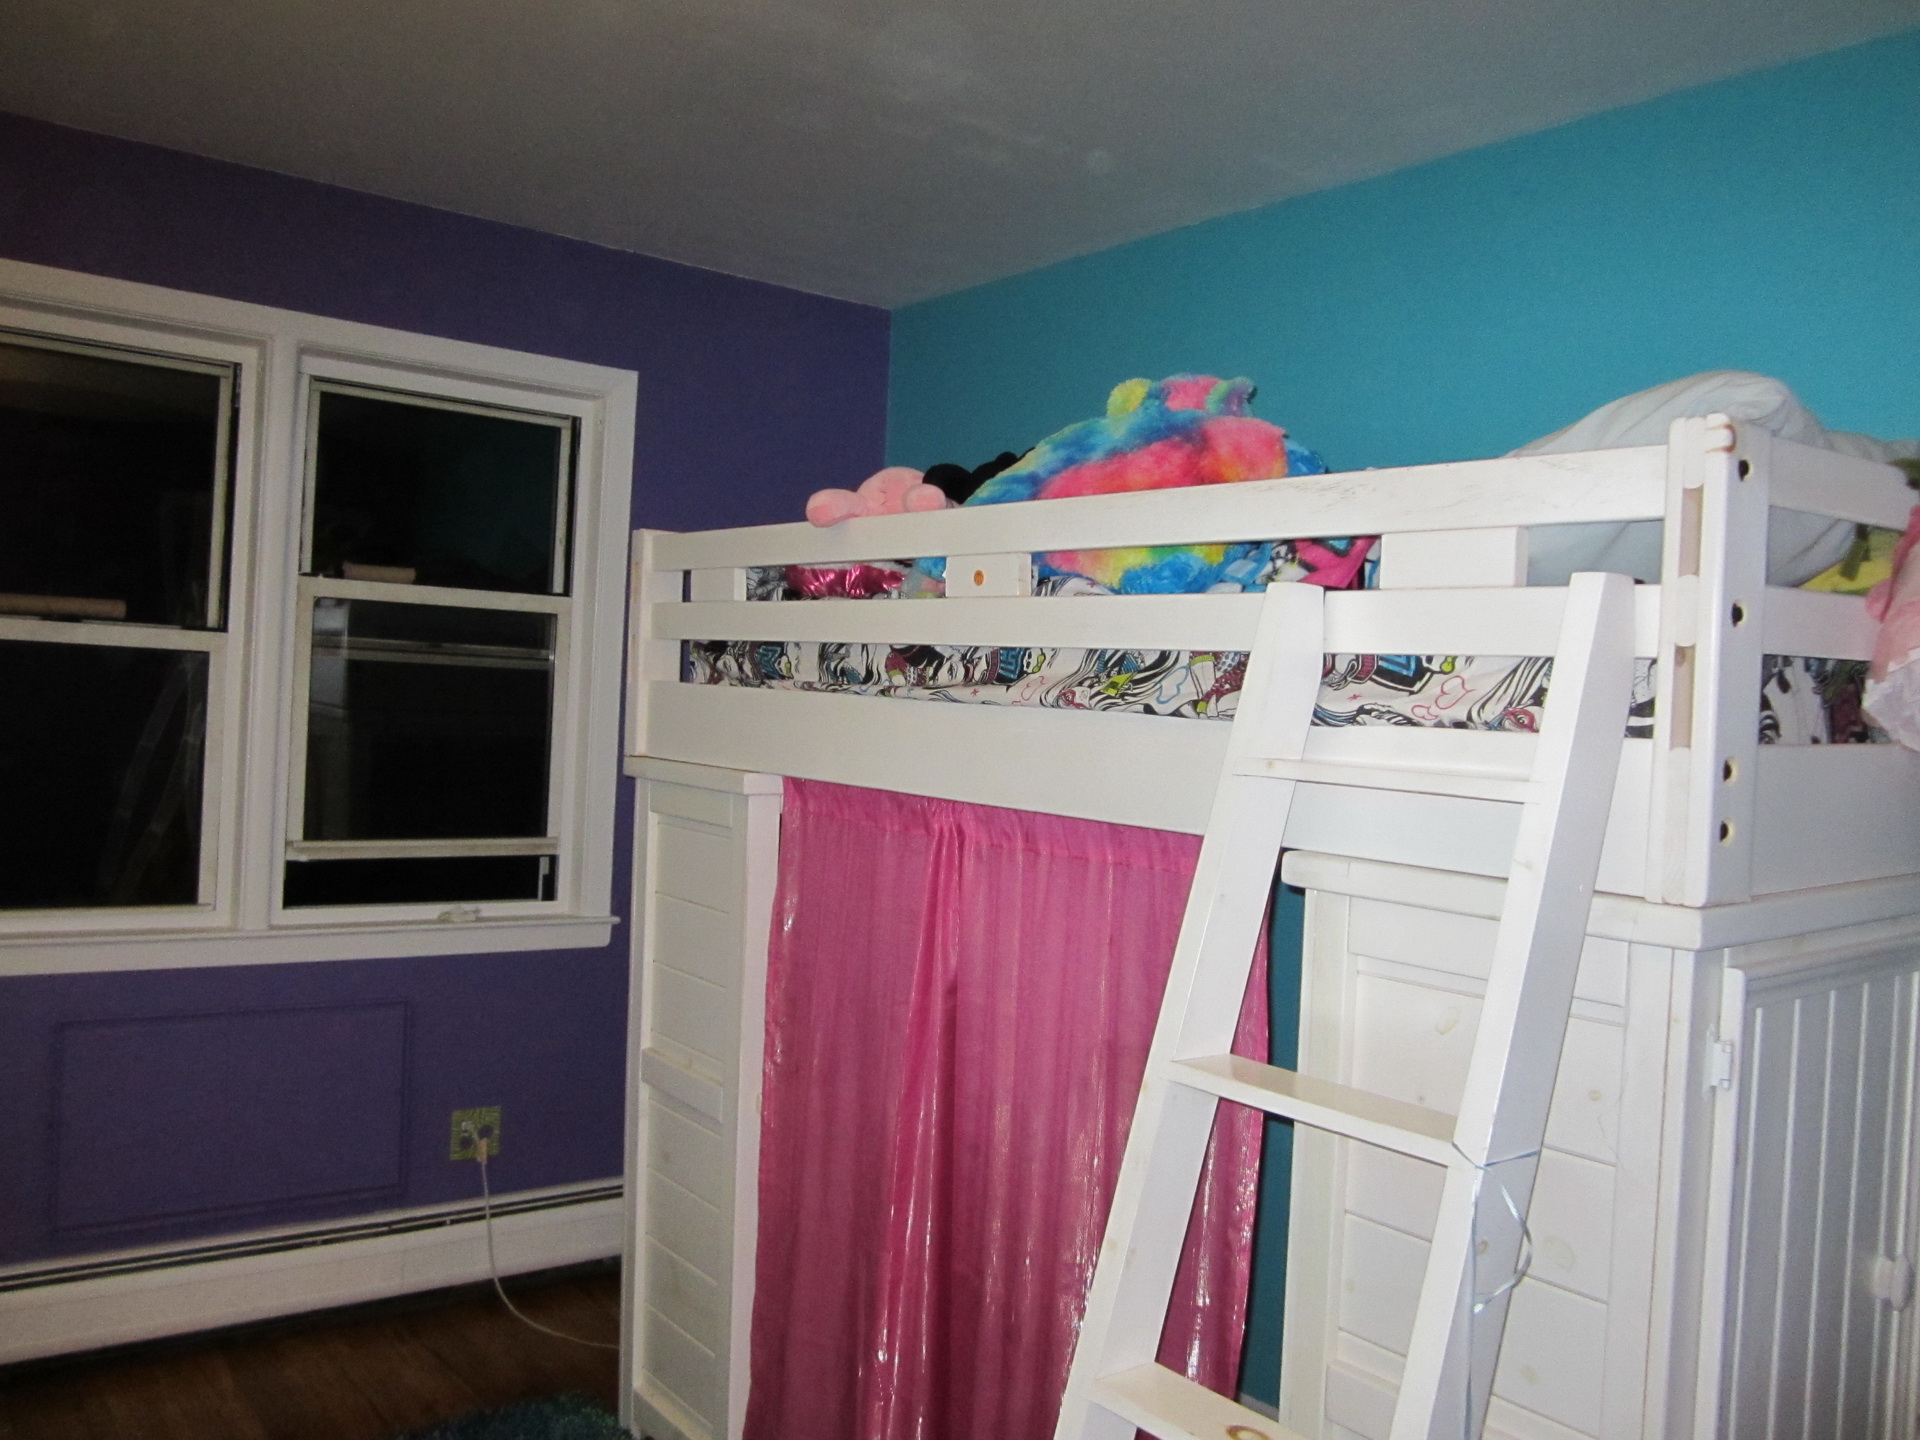 Rooms To Go Kids Mcallen / Discount Bedroom Furniture Rooms To Go Outlet / find deals & save up